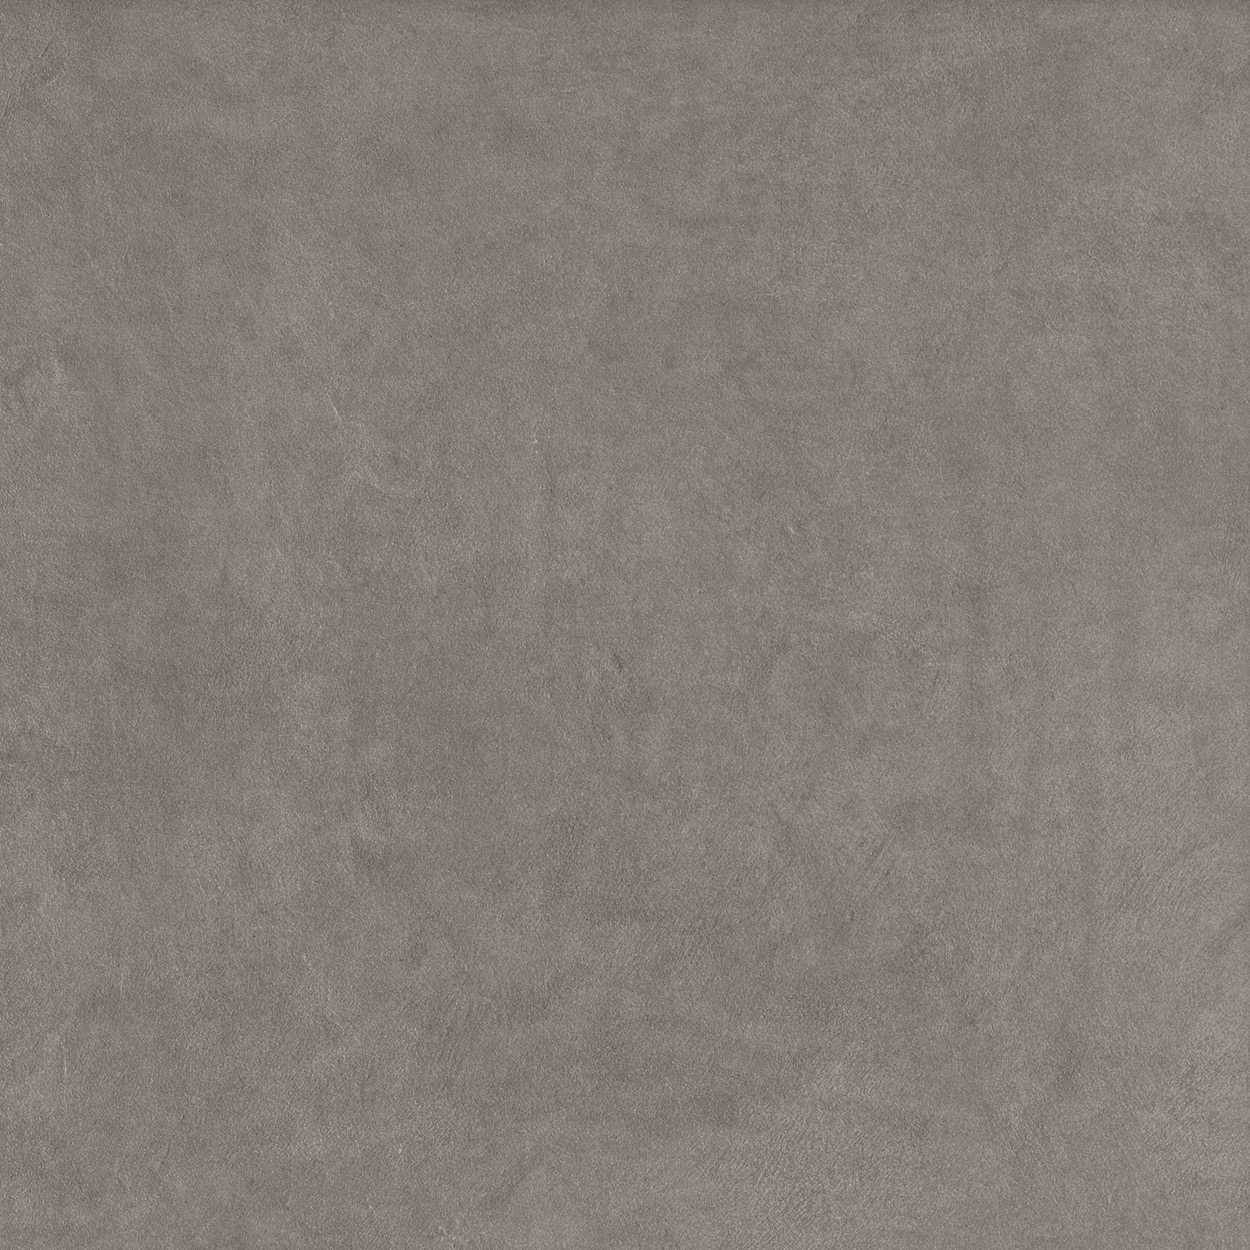 24 x 24 Seamless WR_03 Porcelain tile (SPECIAL ORDER ONLY)